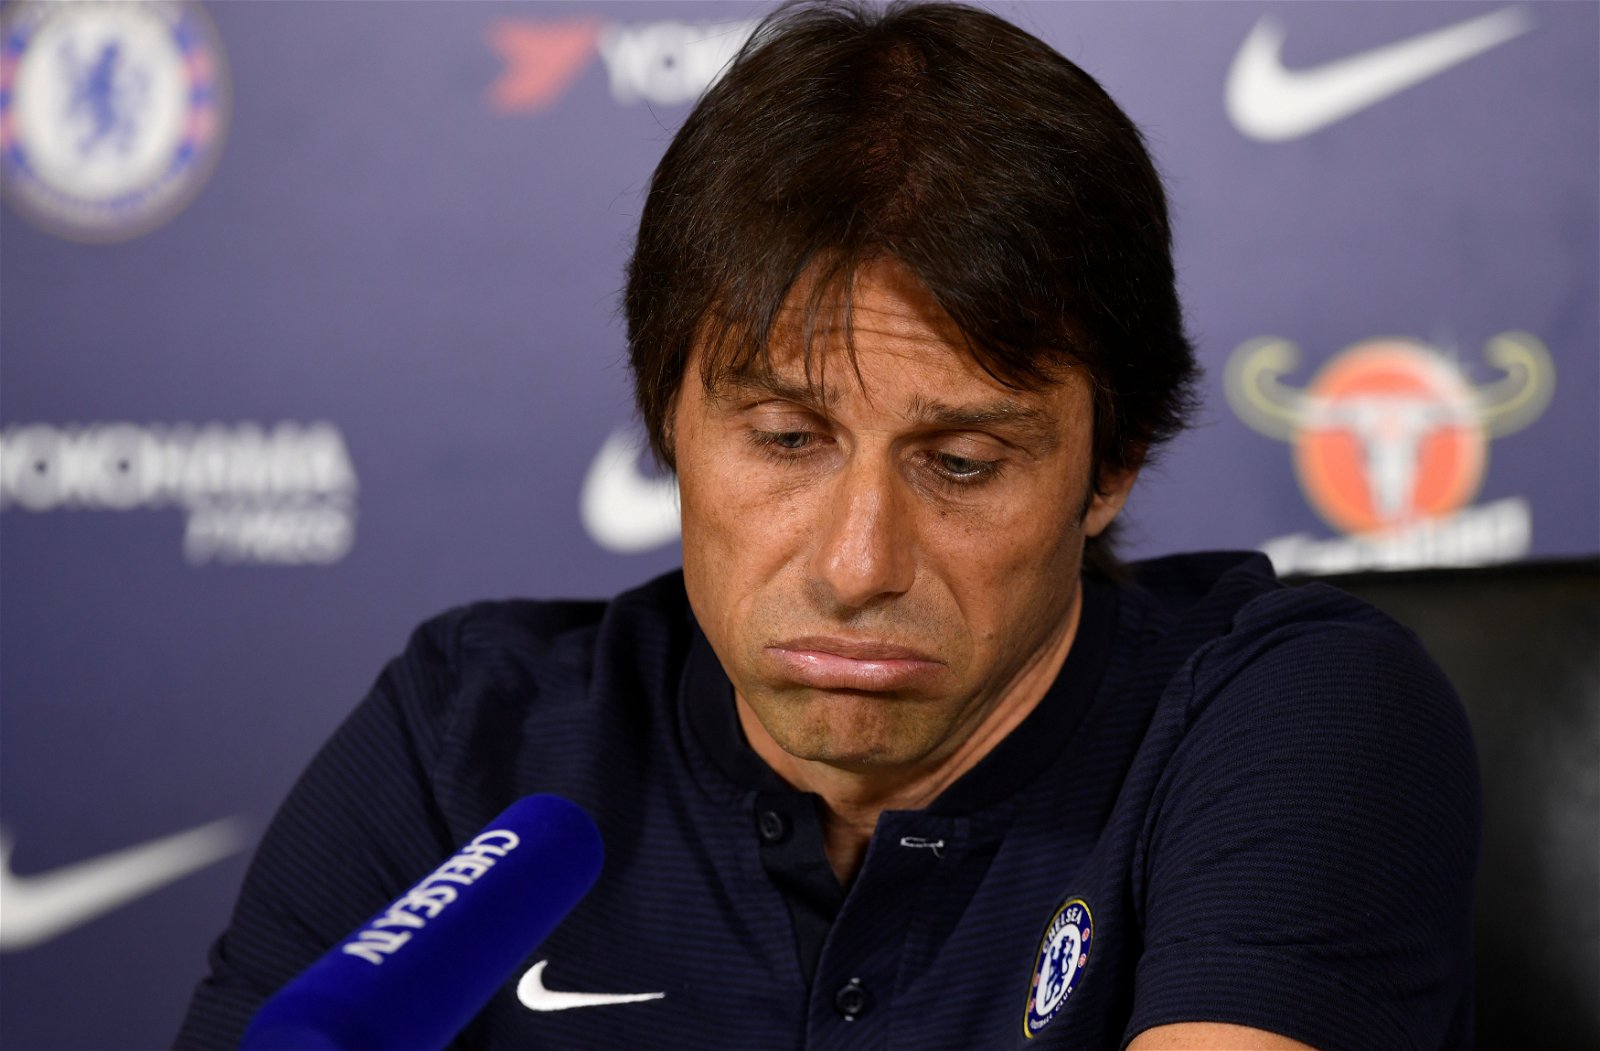 Chelsea players want Conte to be sacked, claims Lebouef